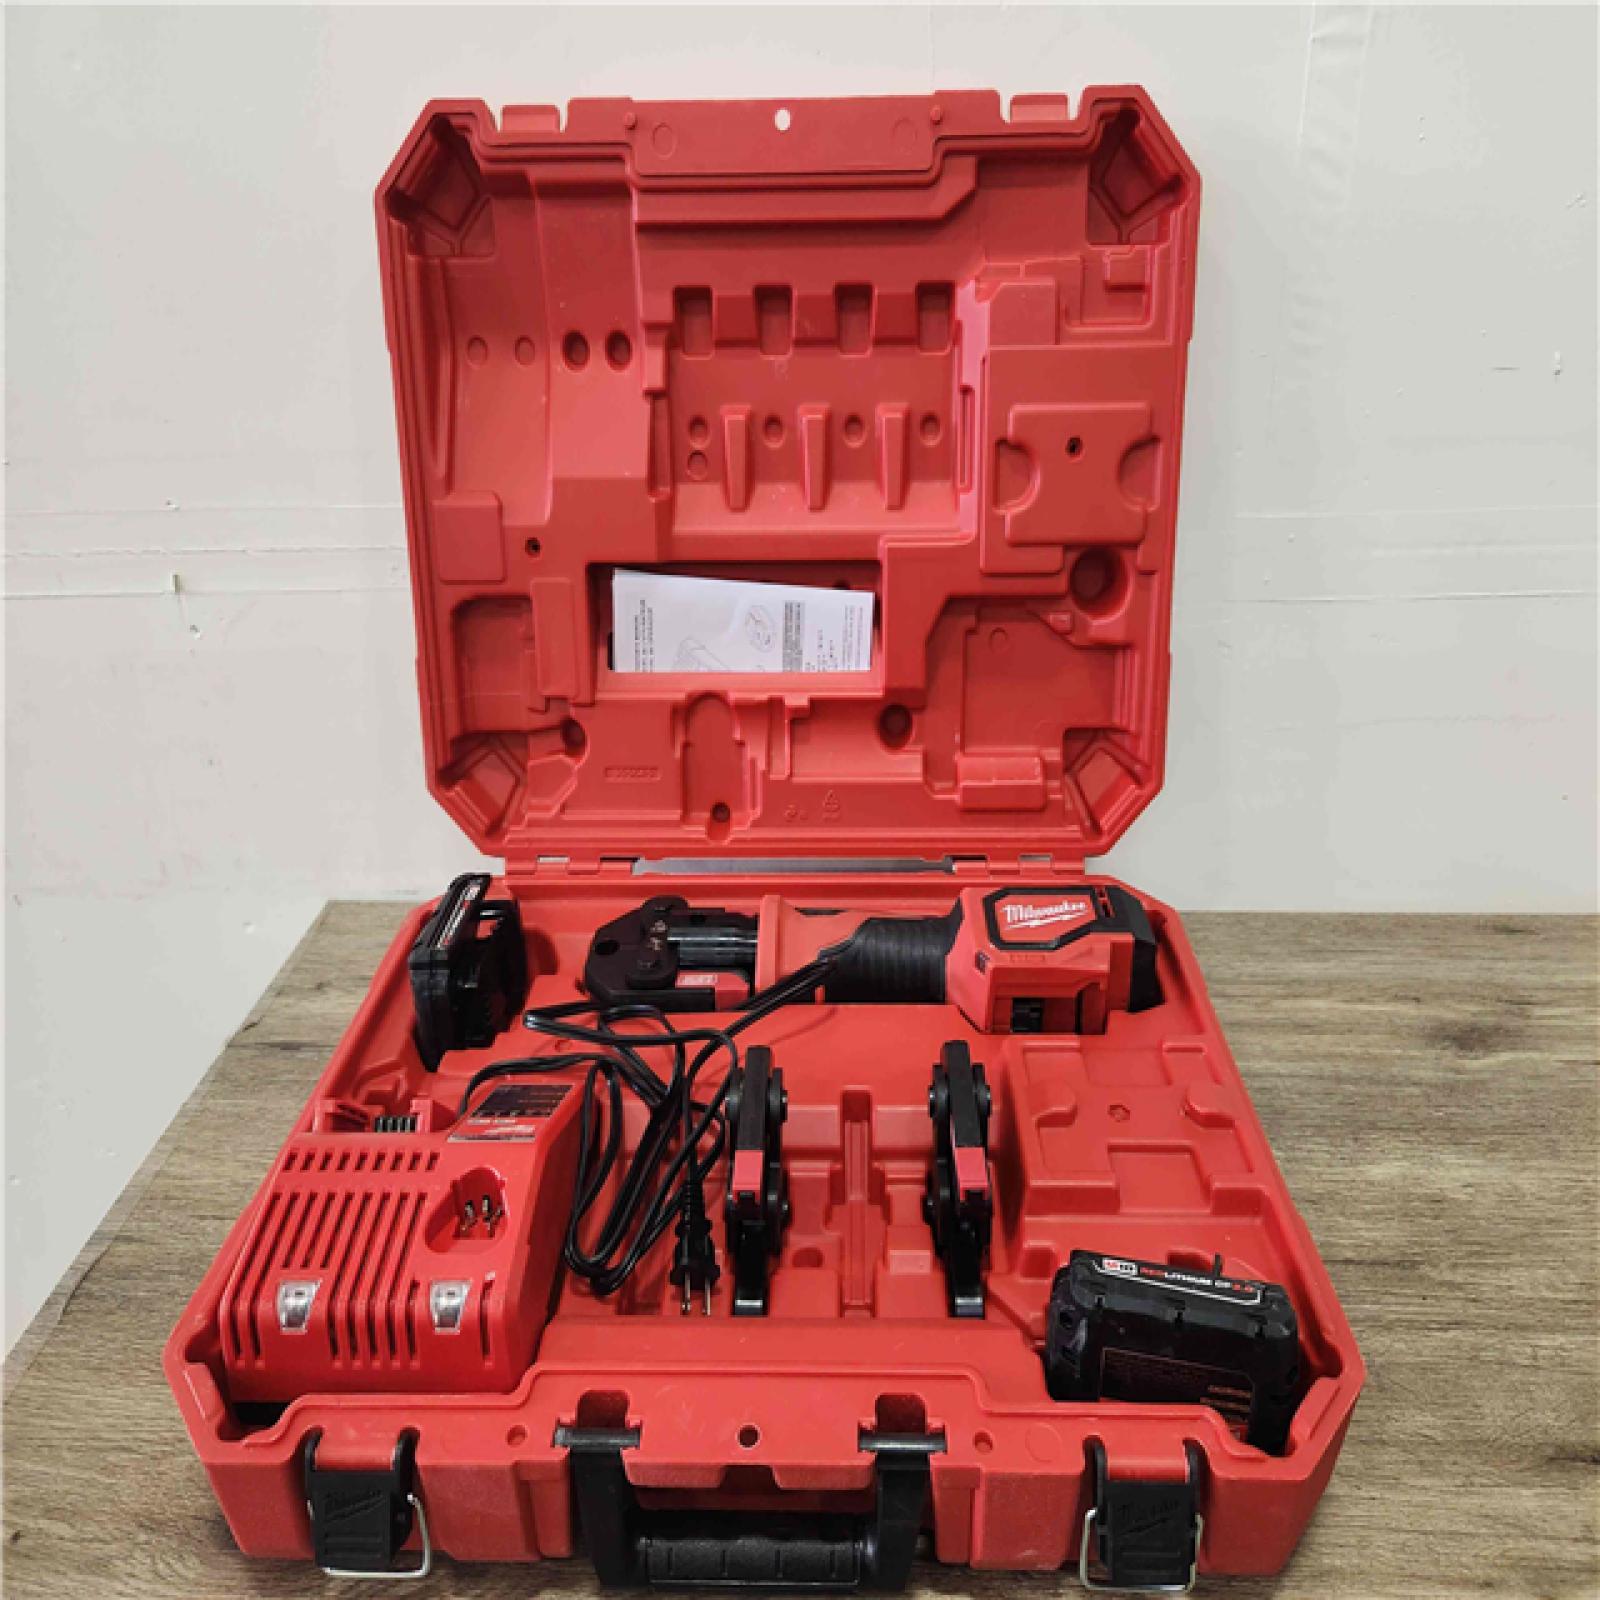 Phoenix Location Appears NEW Milwaukee M18 18V Lithium-Ion Cordless Short Throw Press Tool Kit with 3 PEX Crimp Jaws (2) 2.0 Ah Batteries and Charger 2674-22C